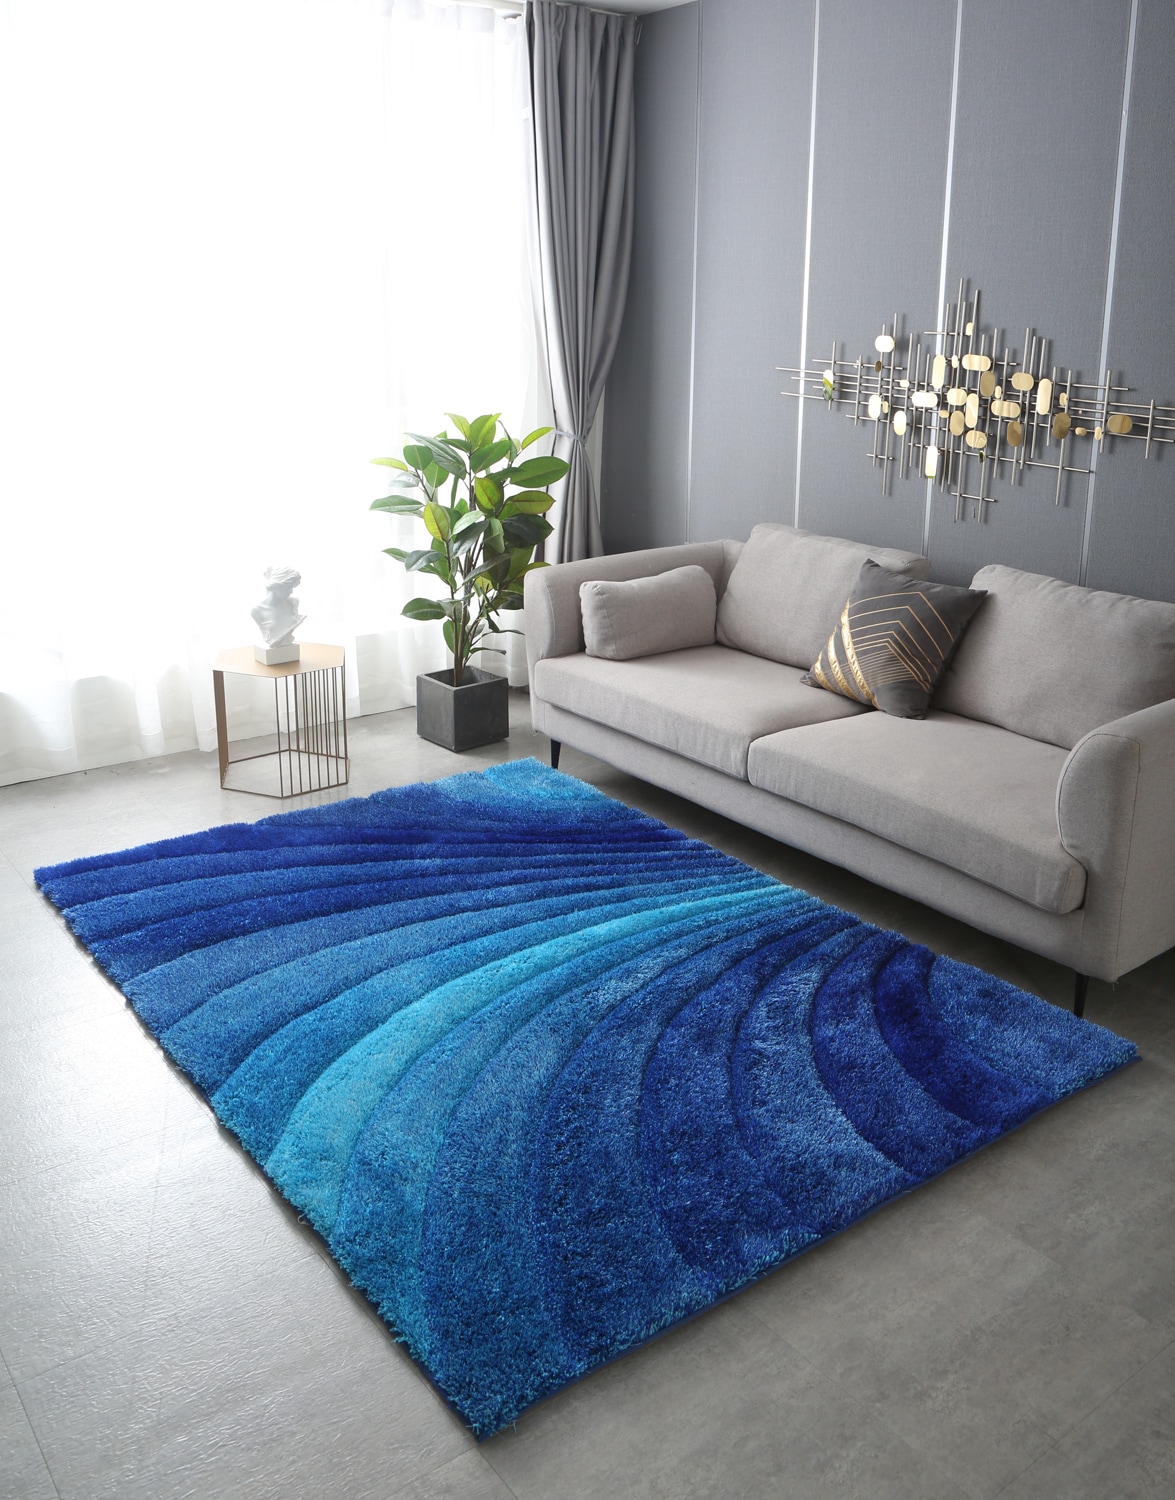 Colorful Moss Rug for Laundry Room 3D Shag Moss Area Rugs Non Spring Moss  Rug